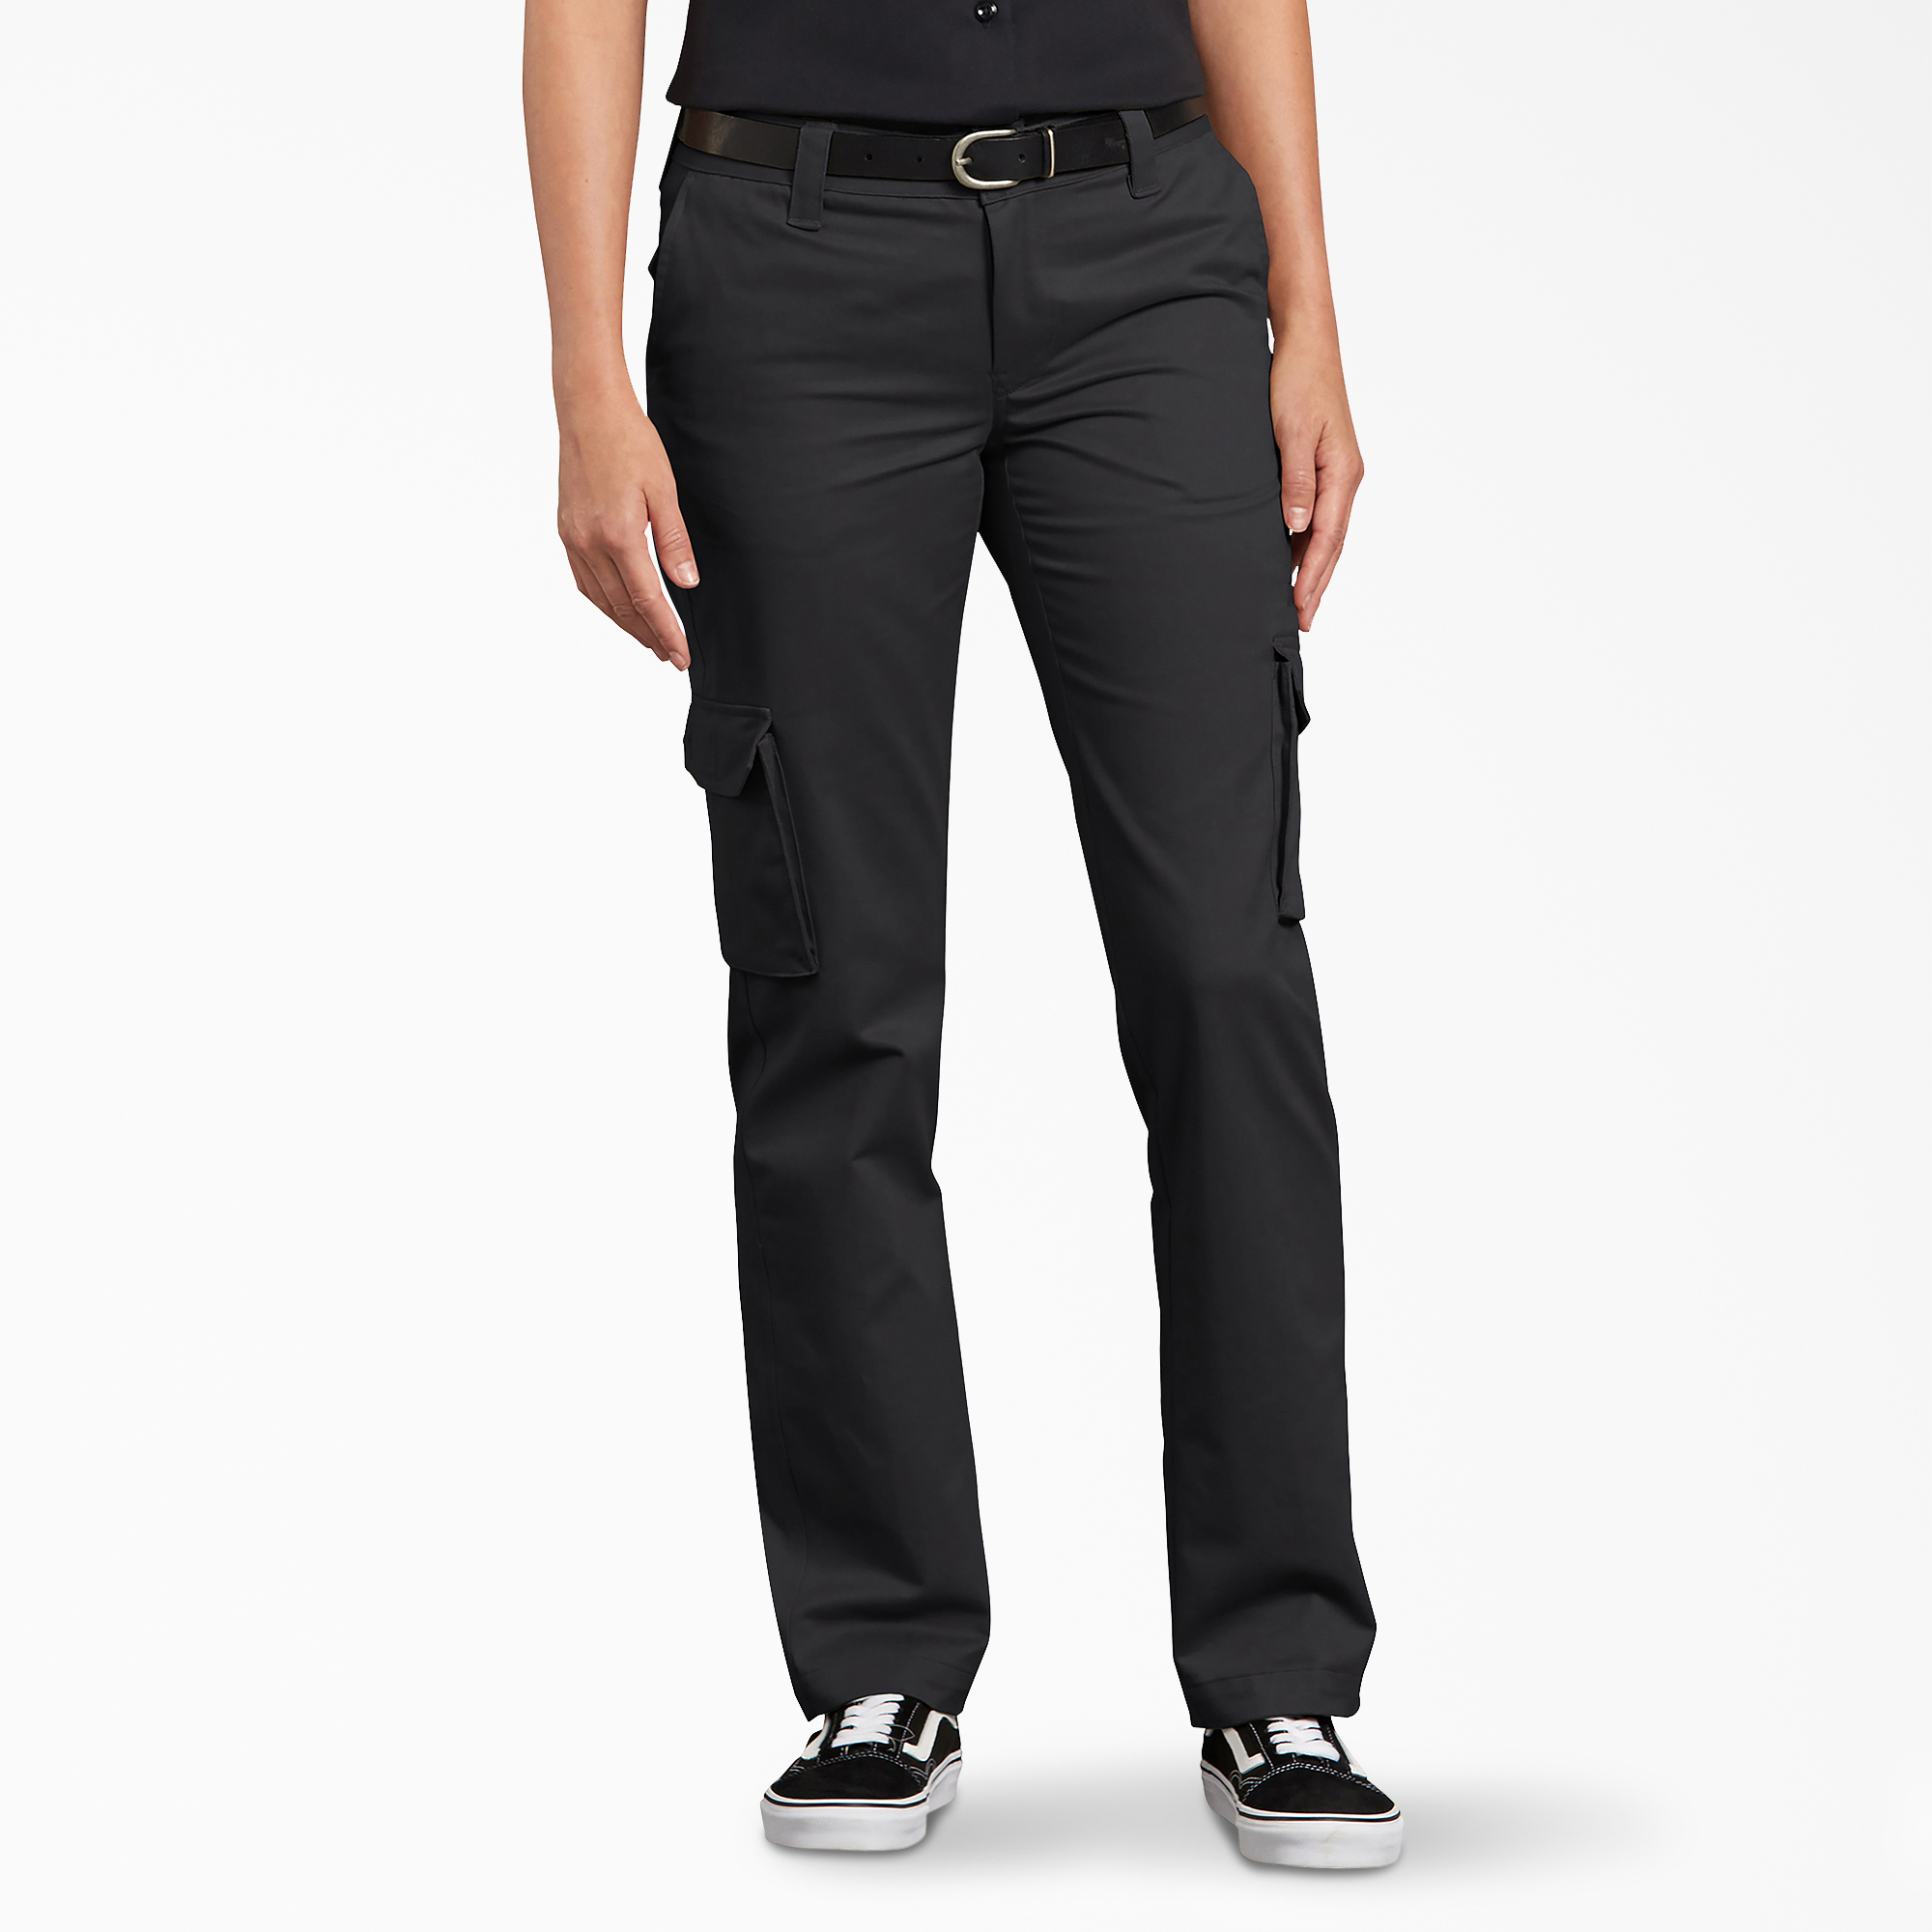 Women's Stretch Relaxed Cargo Pants - Black (BK)